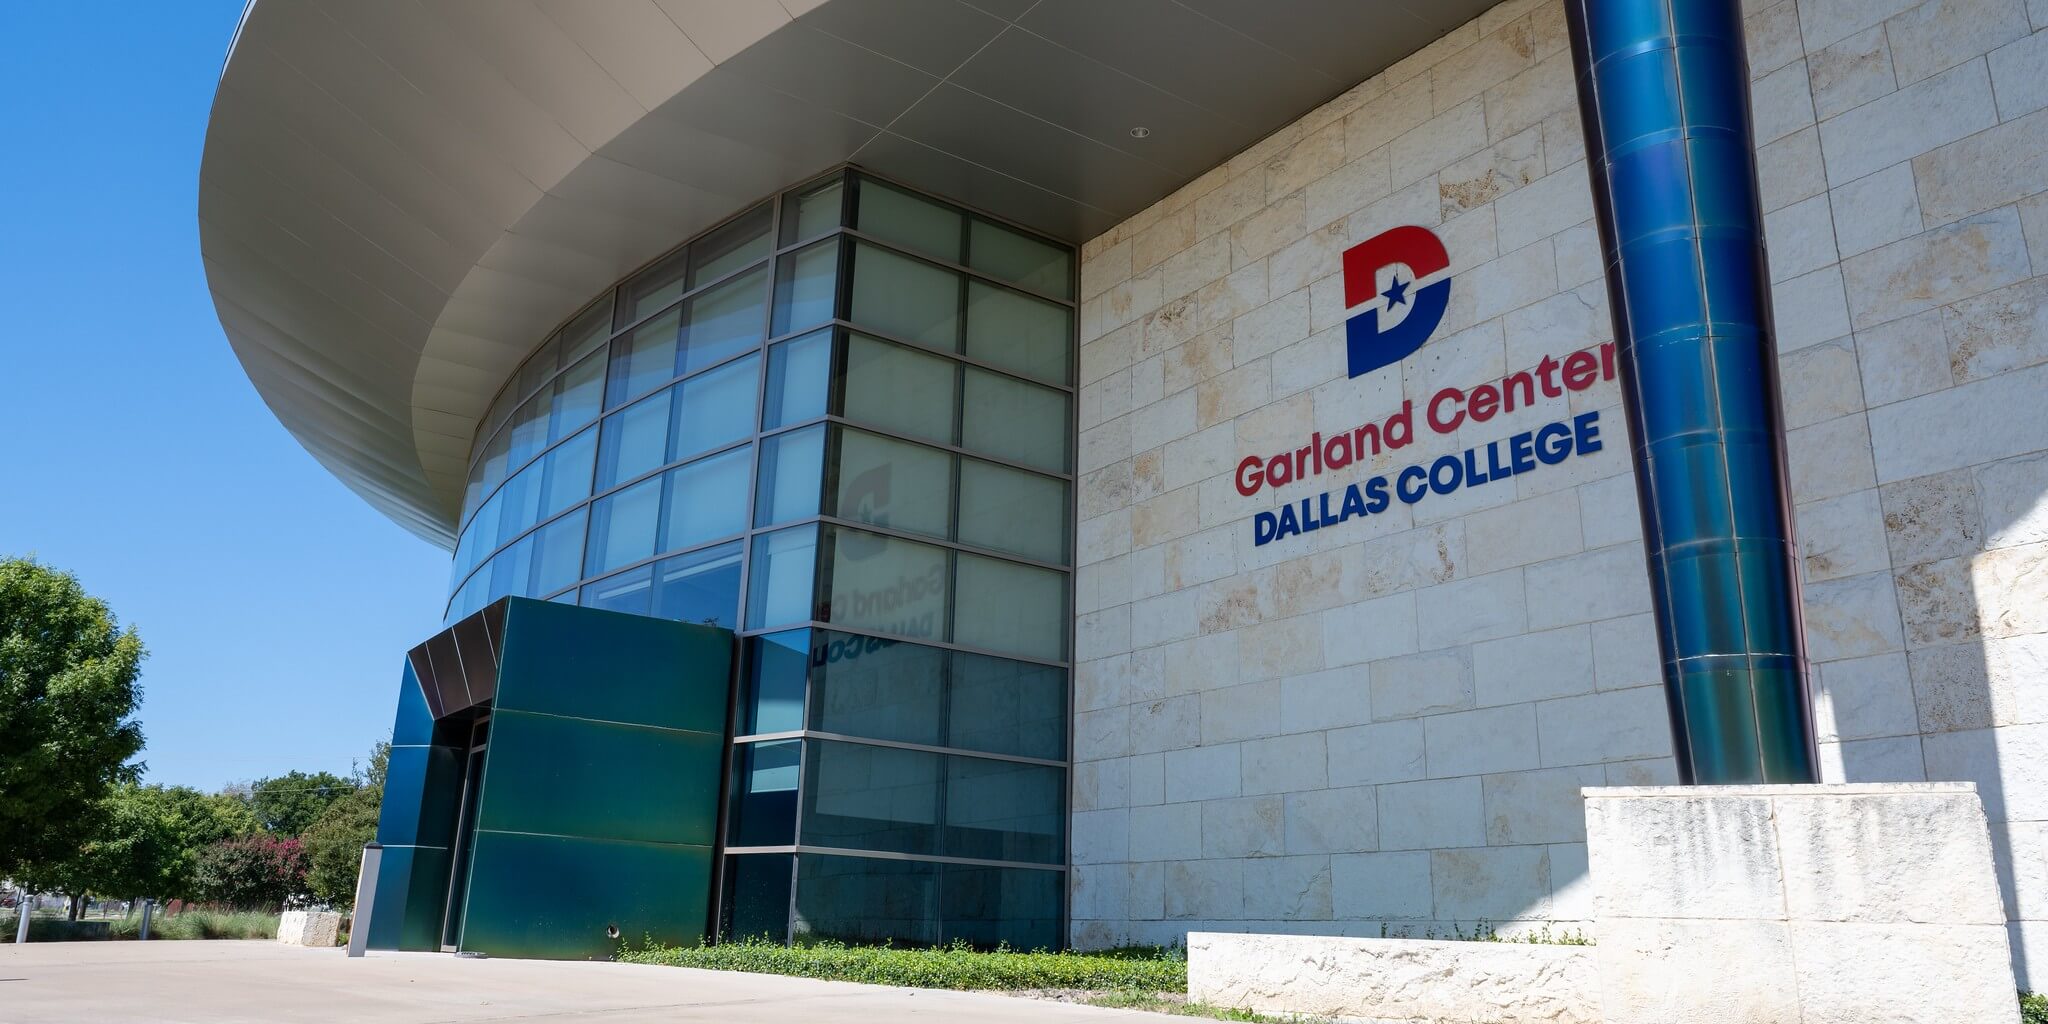 Dallas College building with the sign on it.